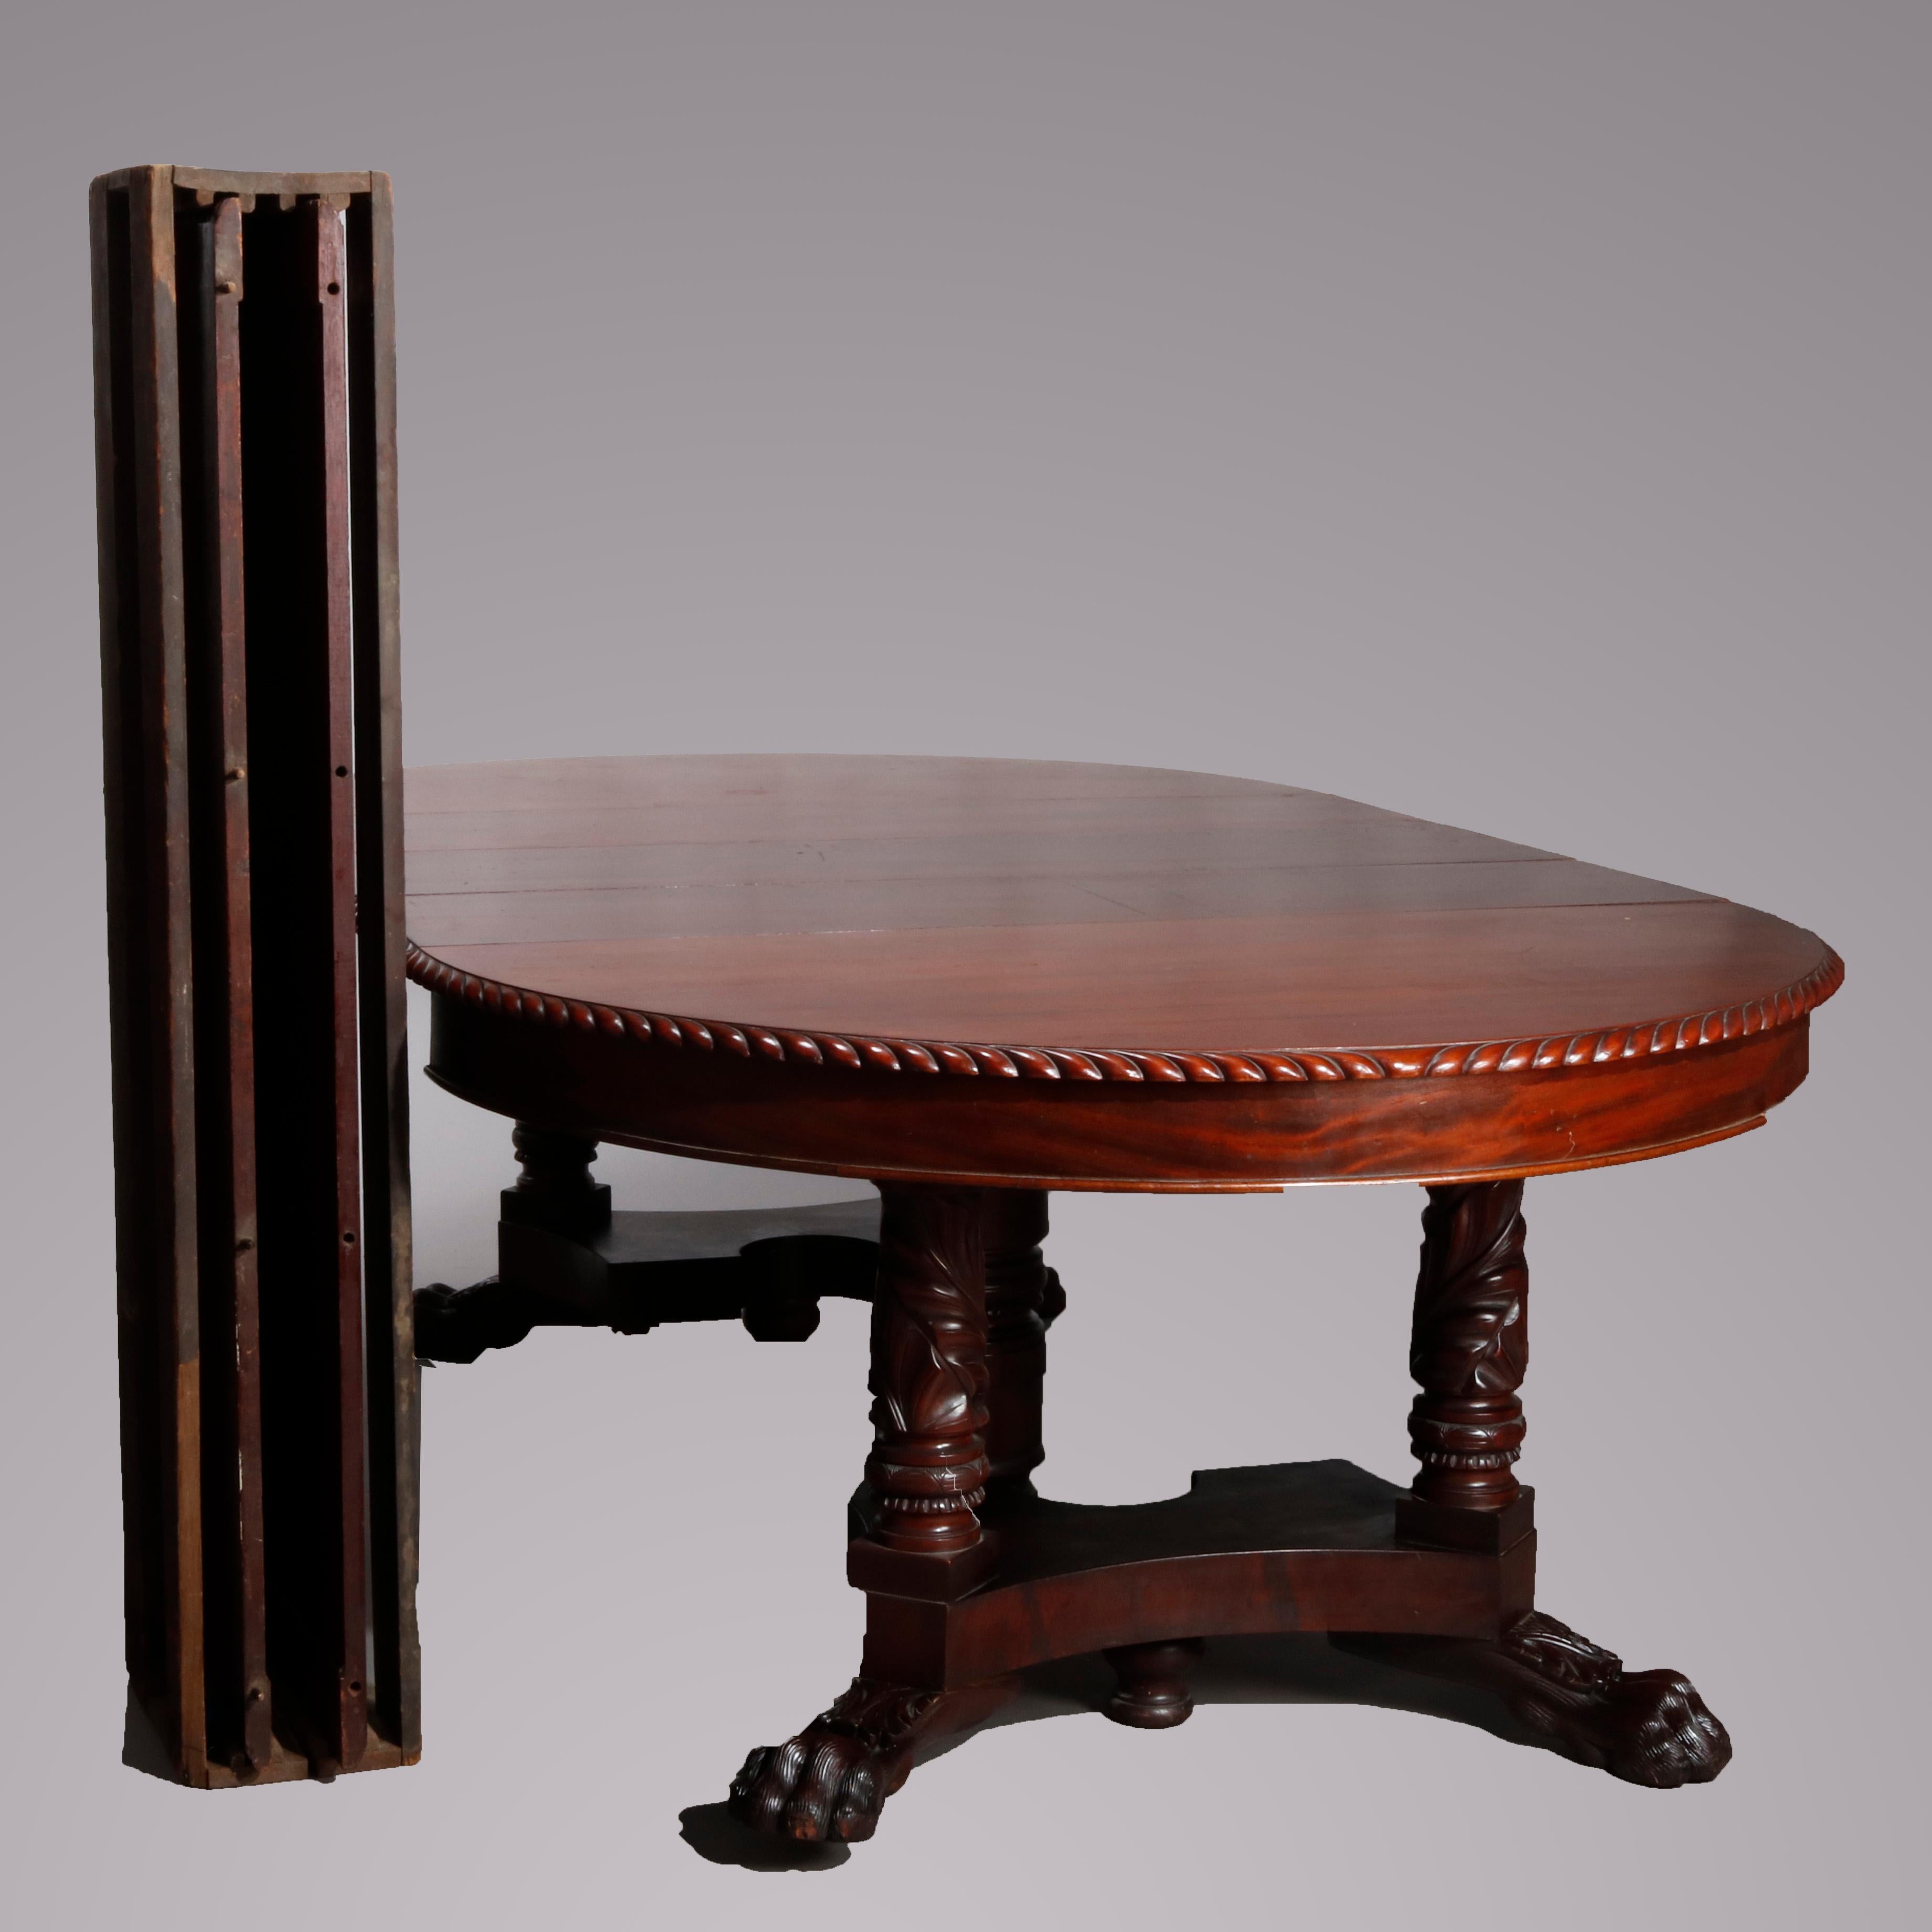 An antique American Empire extension banquet dining table offers flame mahogany construction with top having carved rope twist framing over base with foliate carved legs terminating in paw feet, includes five leaves, 19th century.

Measures: